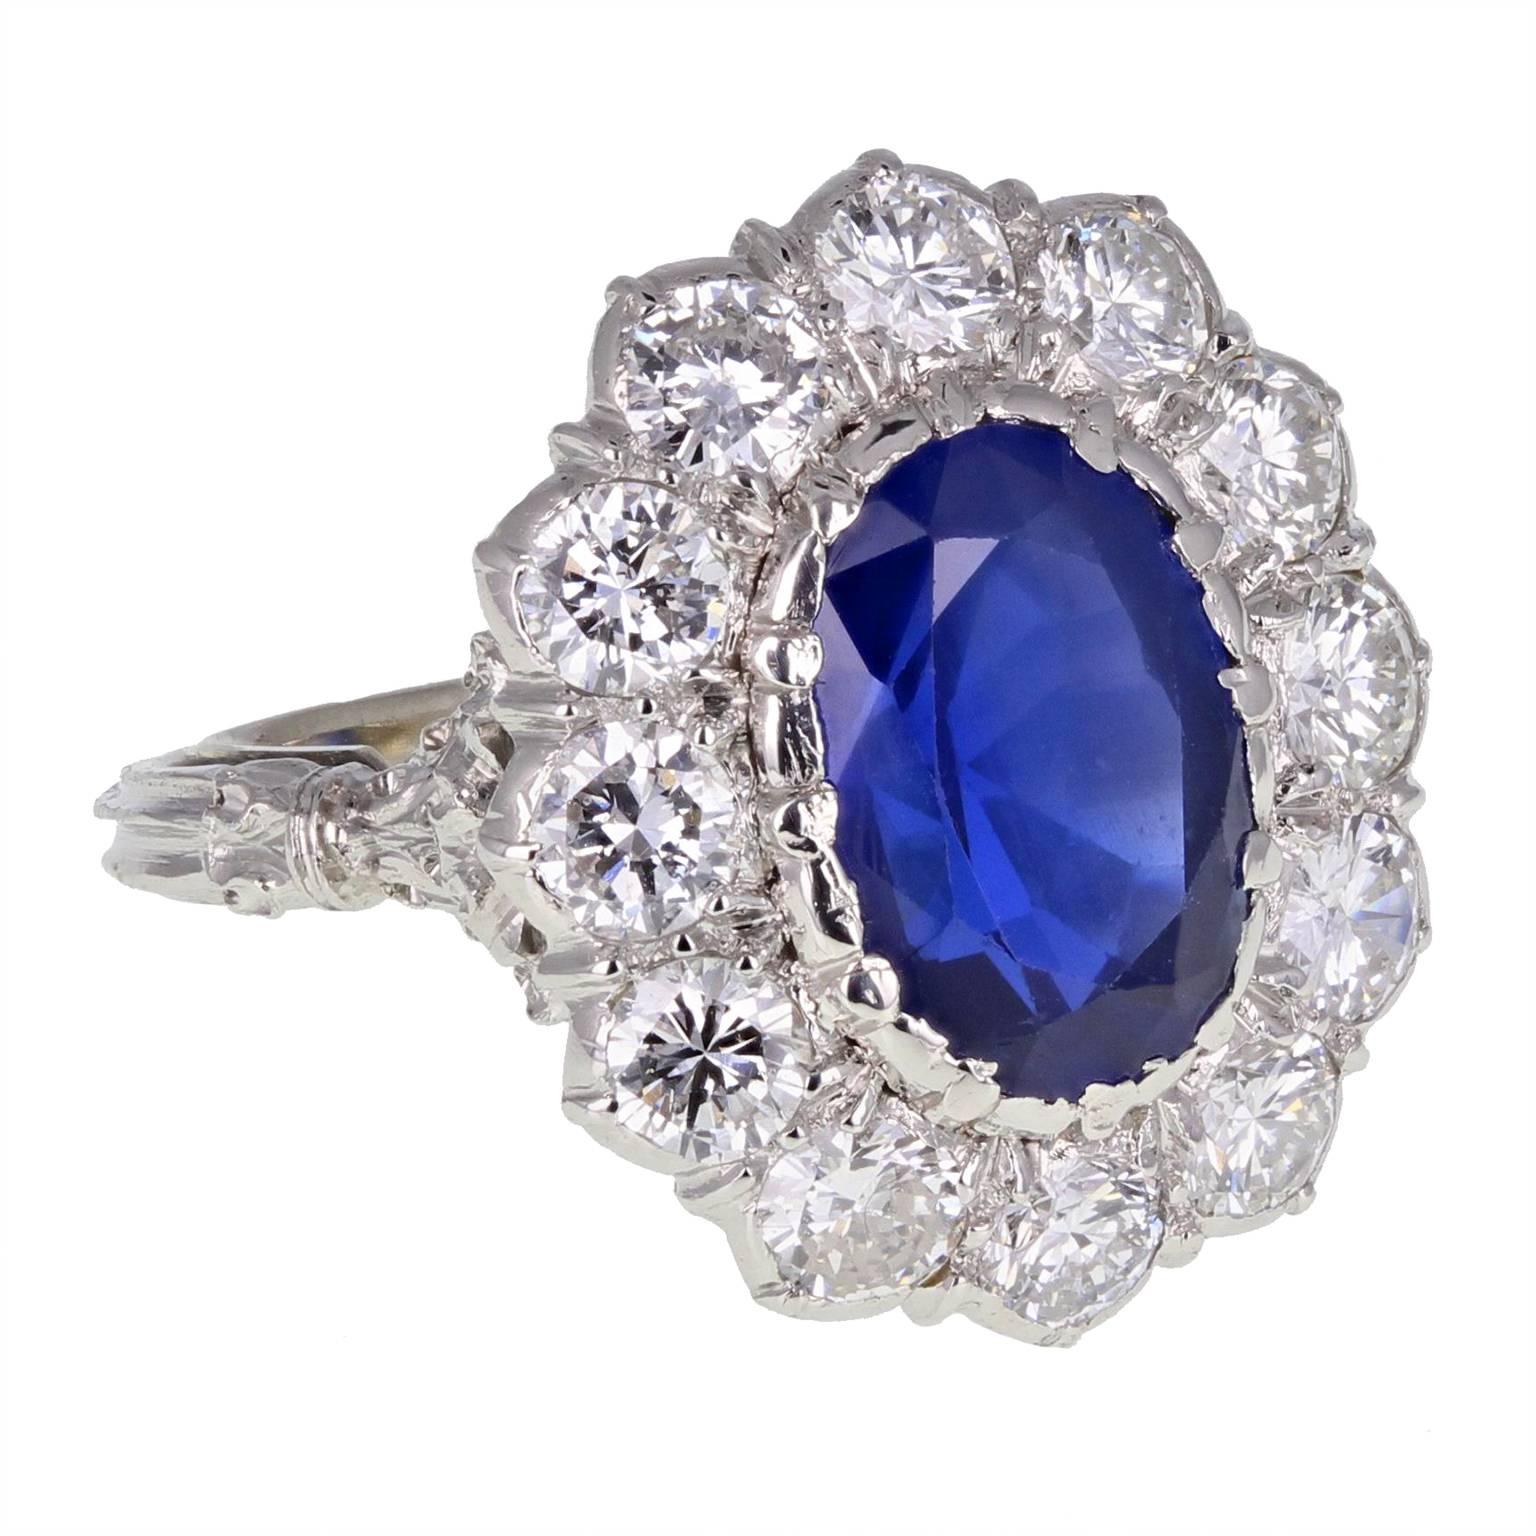 An exquisite Burma sapphire and diamond cluster ring by Buccellati. The oval, unheated sapphire surrounded by bright and lively brilliant-cut diamonds. Highly decorated shoulders and reeded shank. Signed Buccellati.
Specifications:
 
Shank and